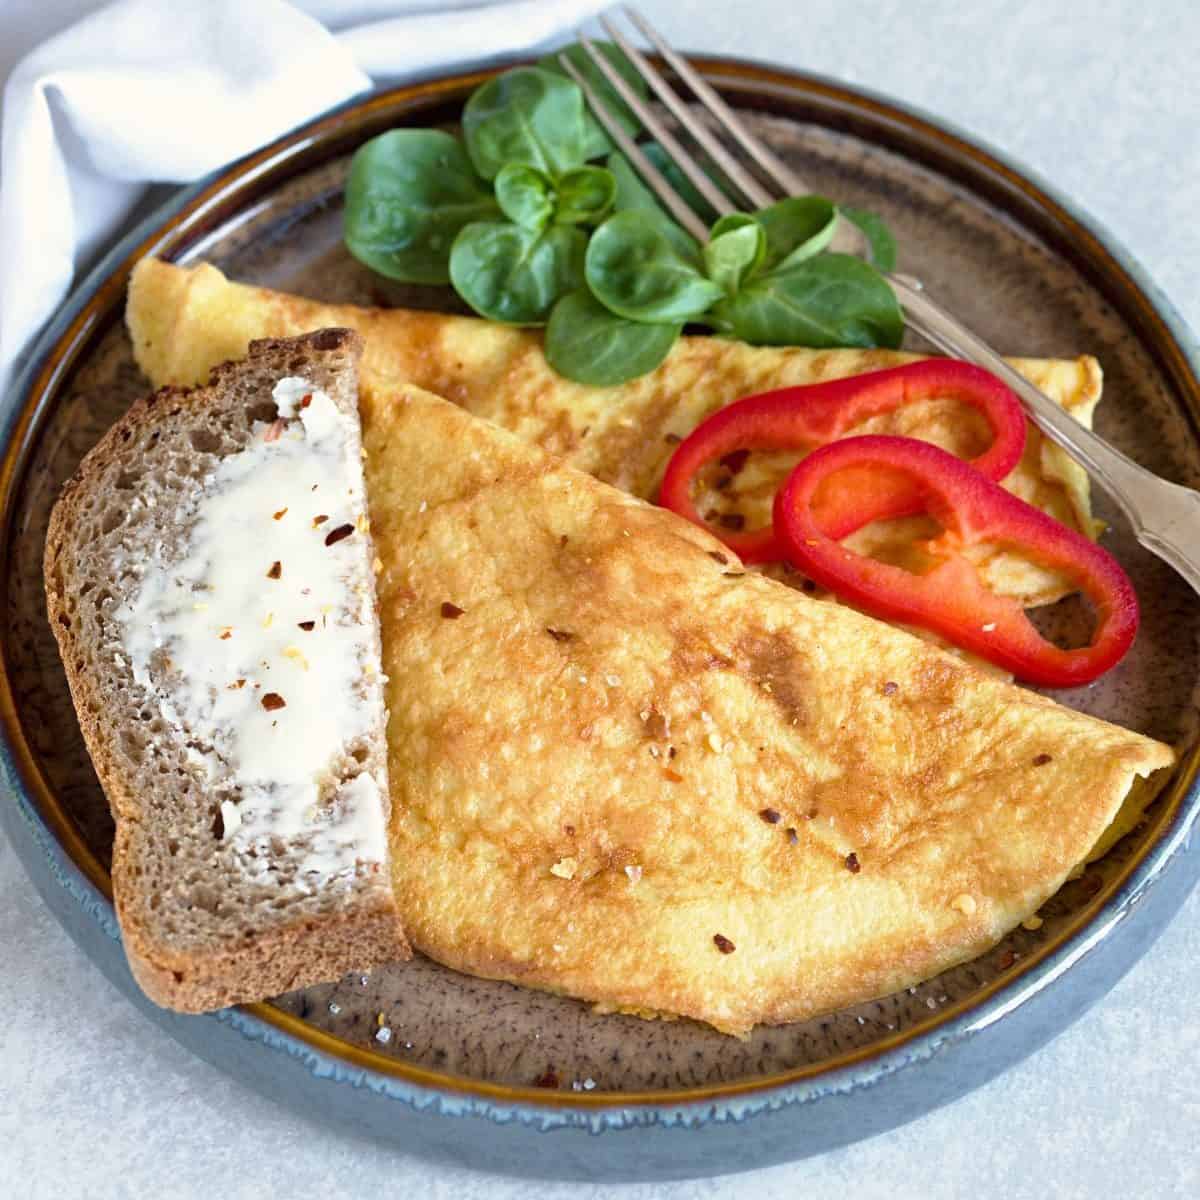 Omelette served on a round plate with vegetables.